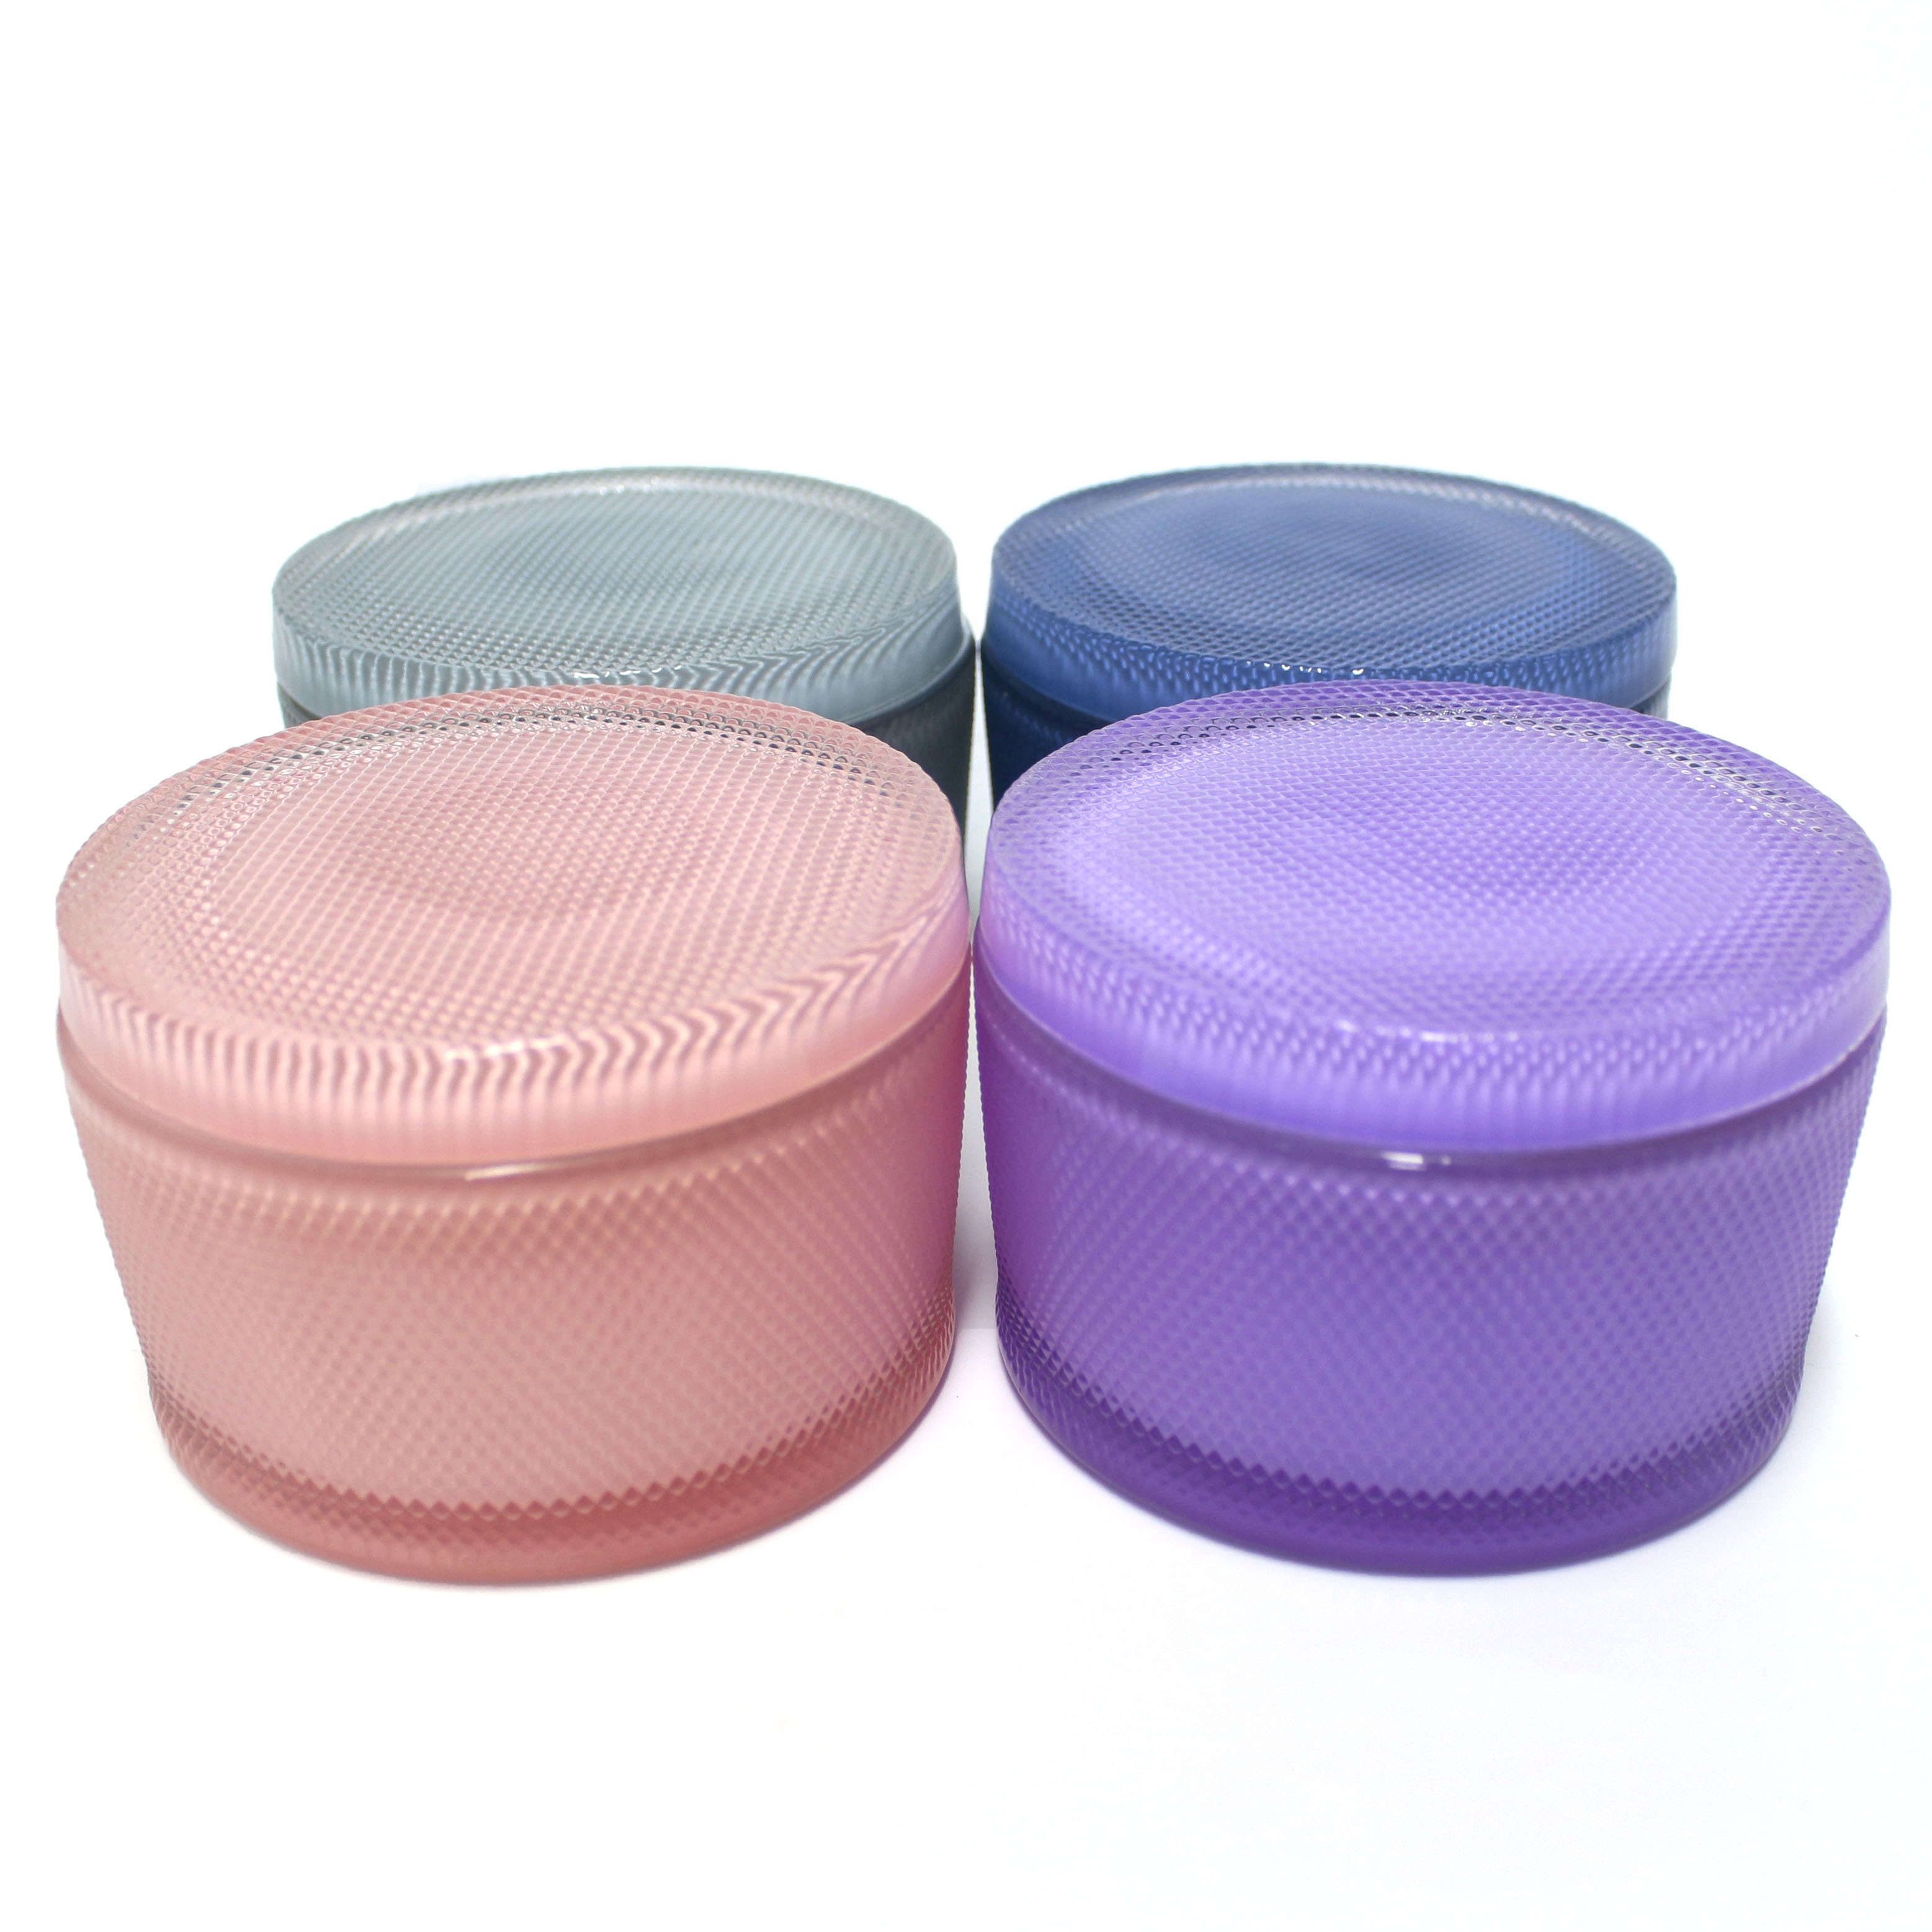 FengJun Wholesale huge Sugar Bowl With Lid Kitchen Colourful Food Storage round Container Glass Candy Jar for home decor wedding